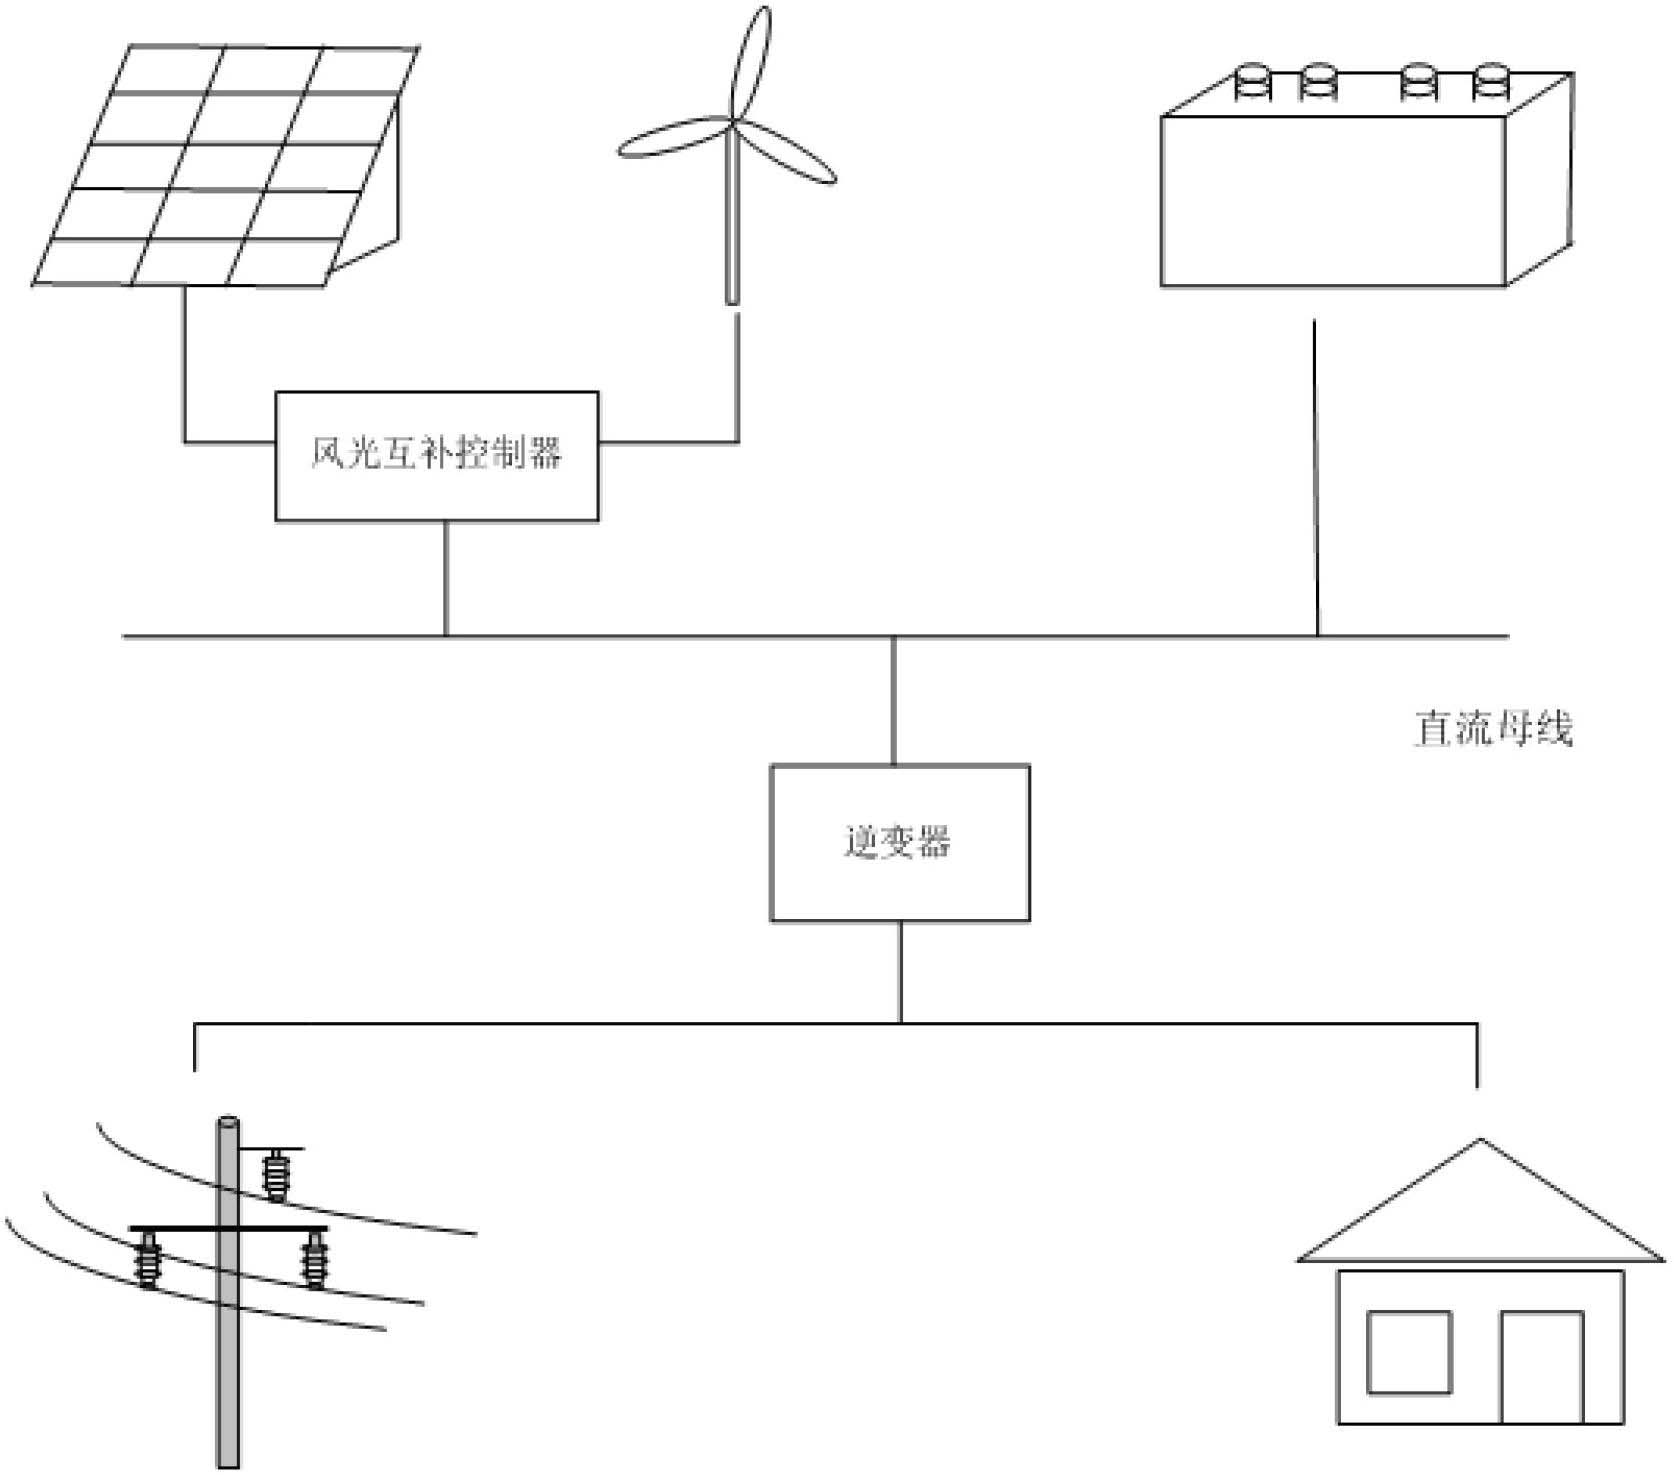 Power supply method for grid-connected and off-grid dual-purpose wind and light complement power generation system